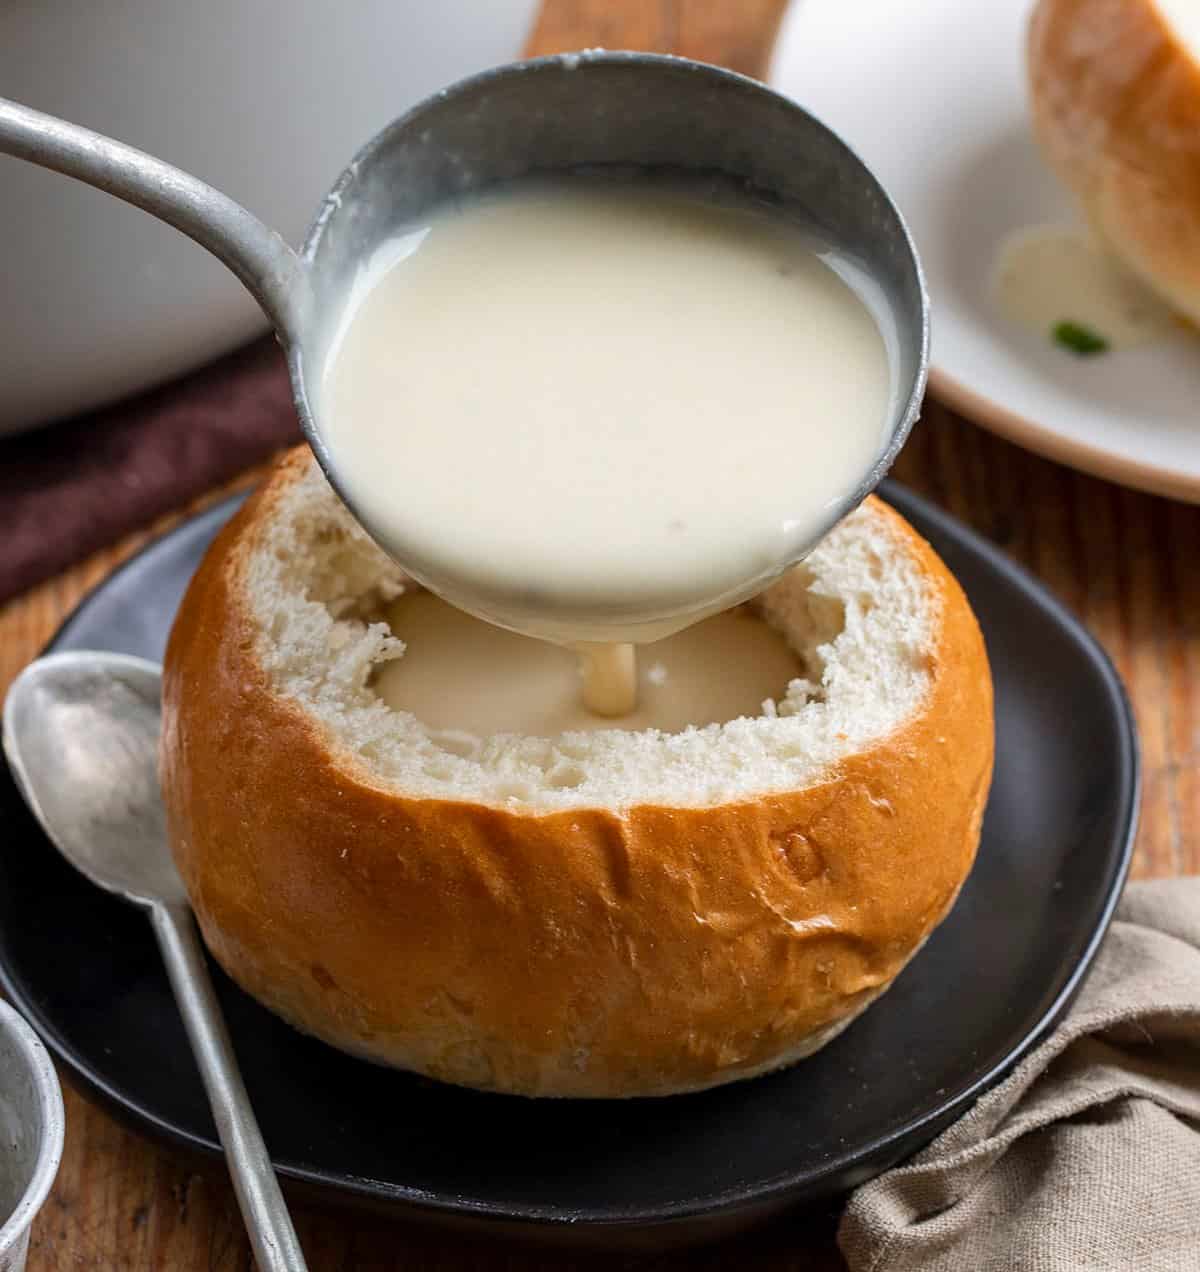 Ladeling 100 Clove Roasted Garlic Soup into a Bread Bowl.